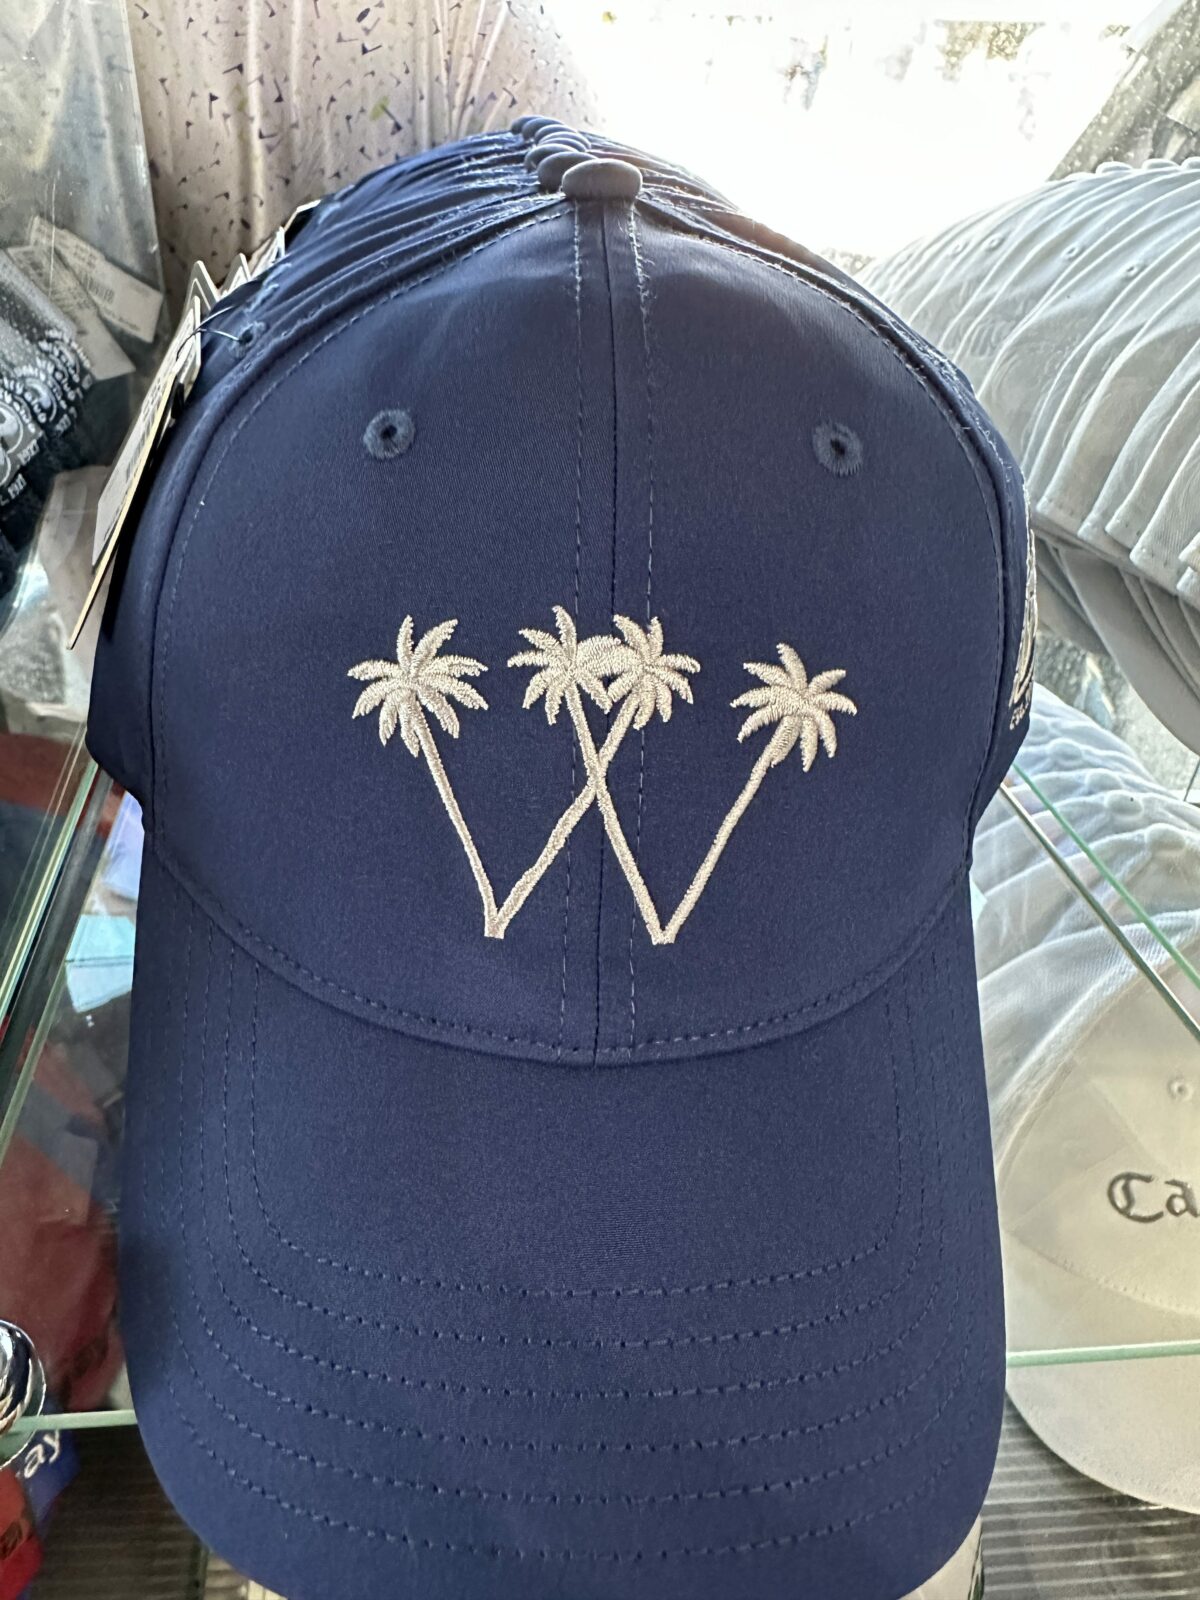 2023 Sony Open: Aloha to great caps and other goodies at the Waialae CC pro shop